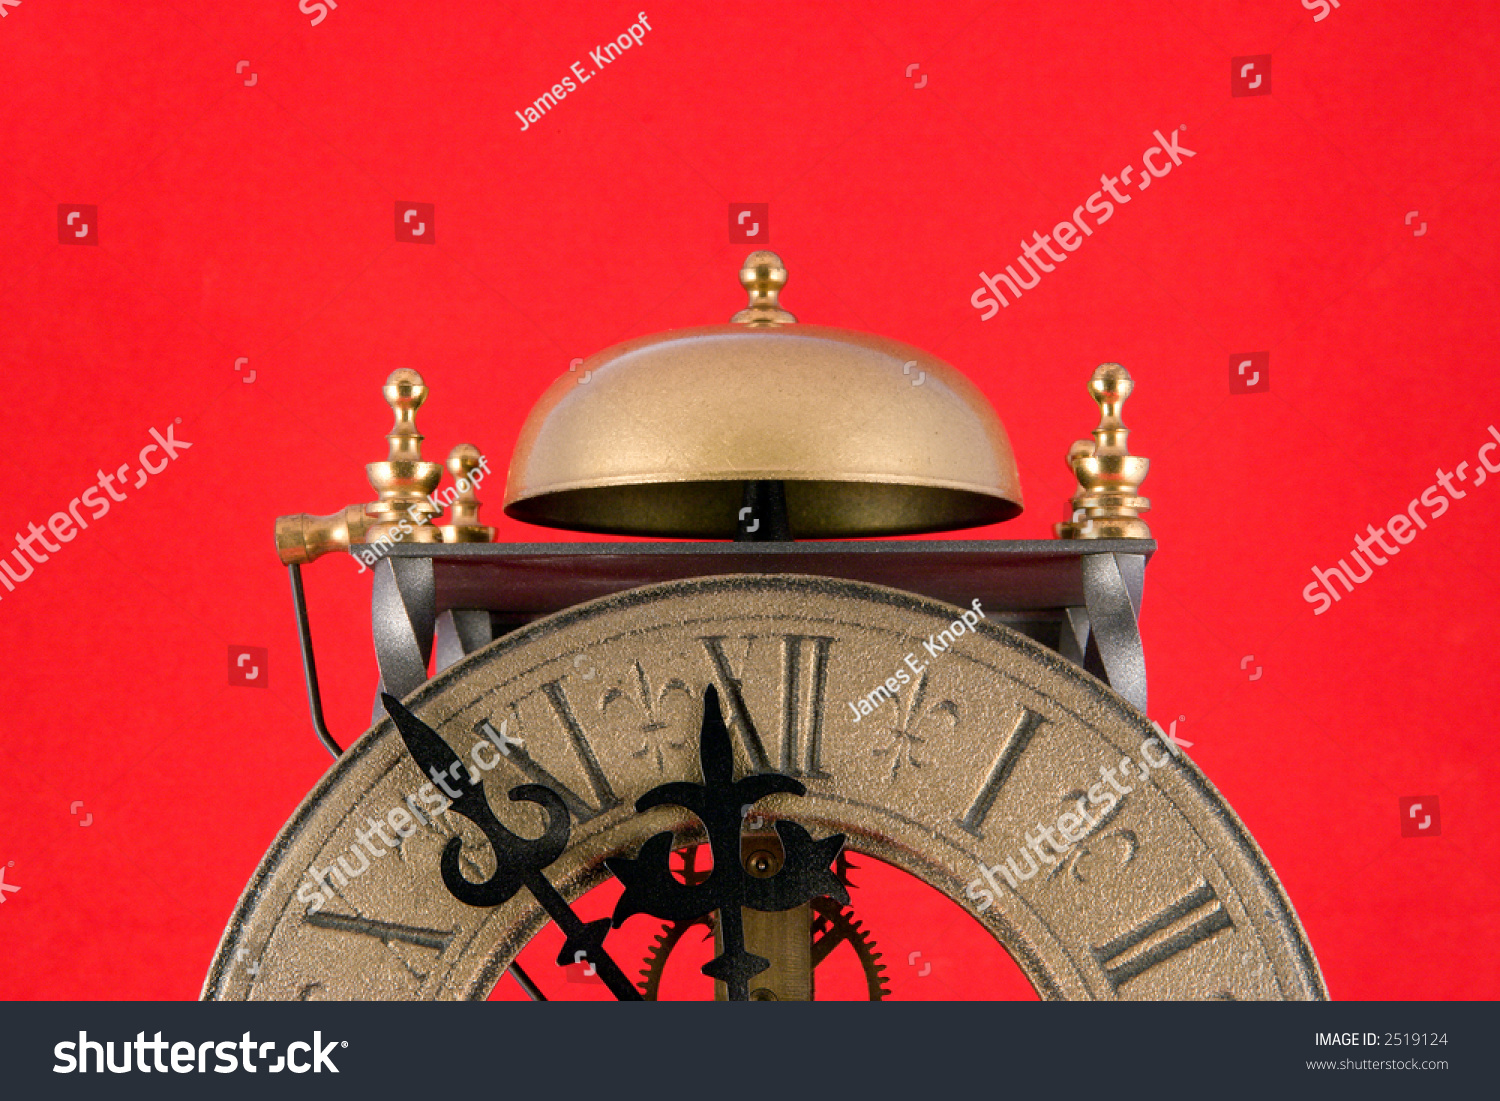 Doomsday Clock At Its Current Setting Of Seven Minutes Until Midnight. Stock Photo ...1500 x 1101